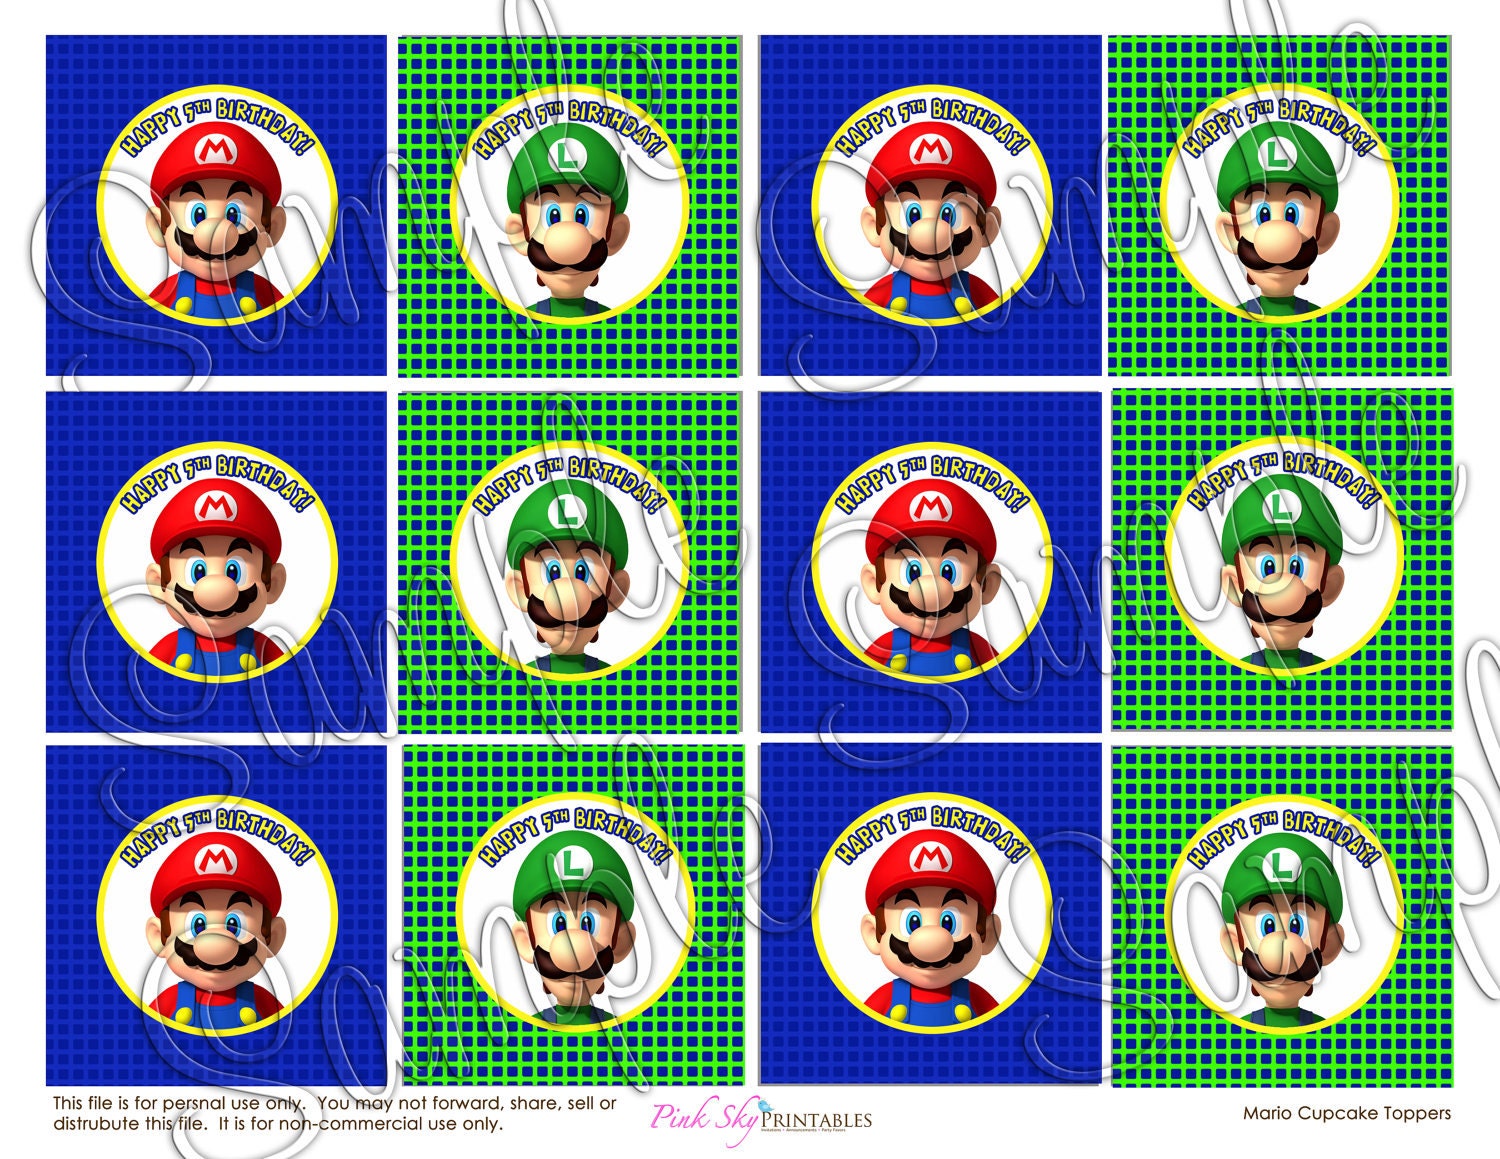 Bros. PinkSkyPrintables Printable Toppers Cupcake Mario vintage Etsy cupcake by mario on toppers